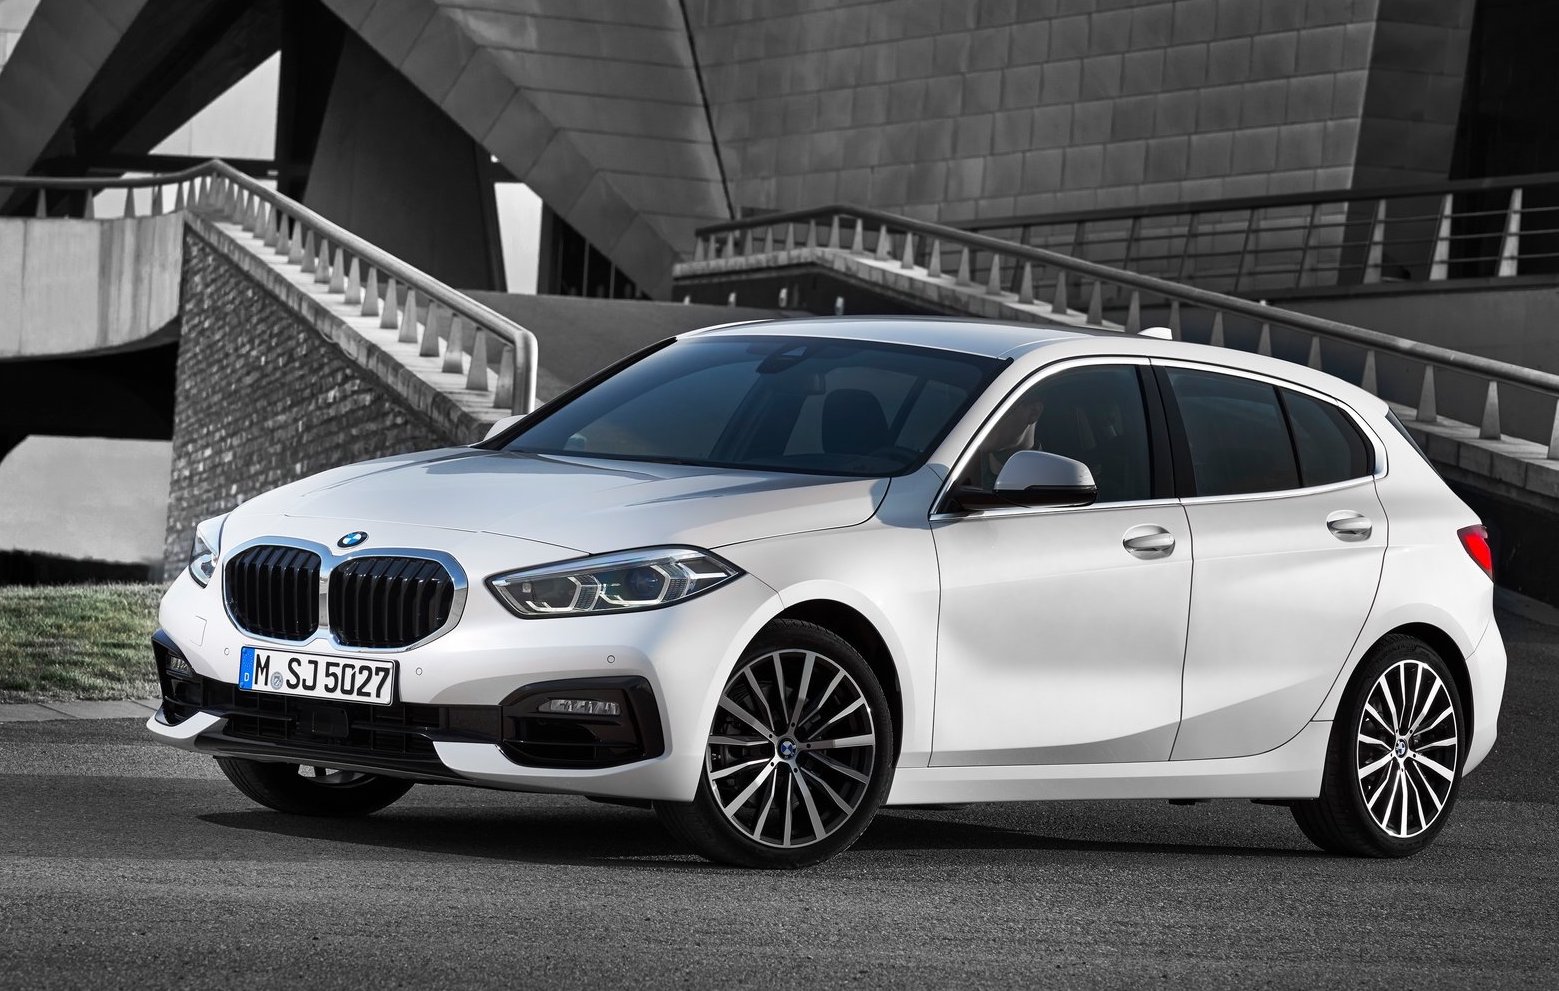 2020 BMW 1 Series revealed, topped by M135i xDrive